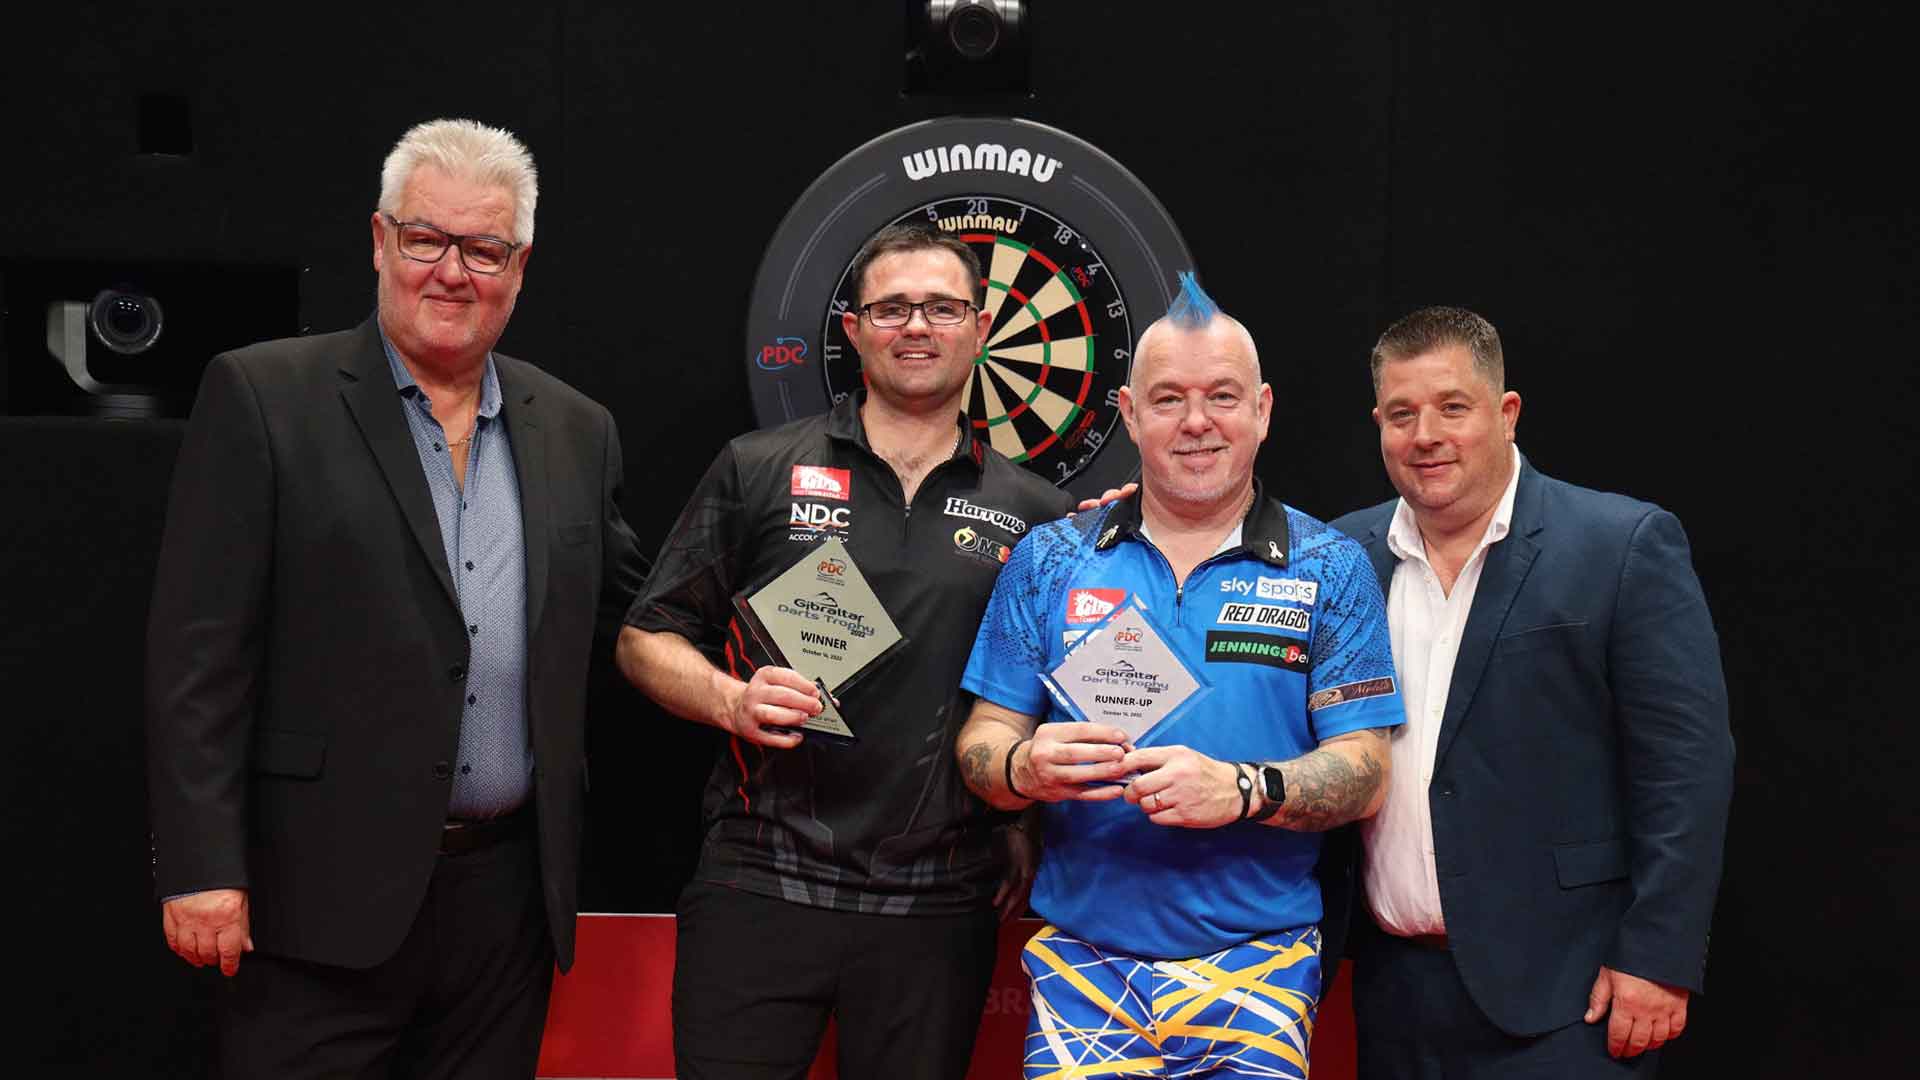 Gibraltar Darts Trophy 2022 Draw, schedule, results, odds and TV coverage details